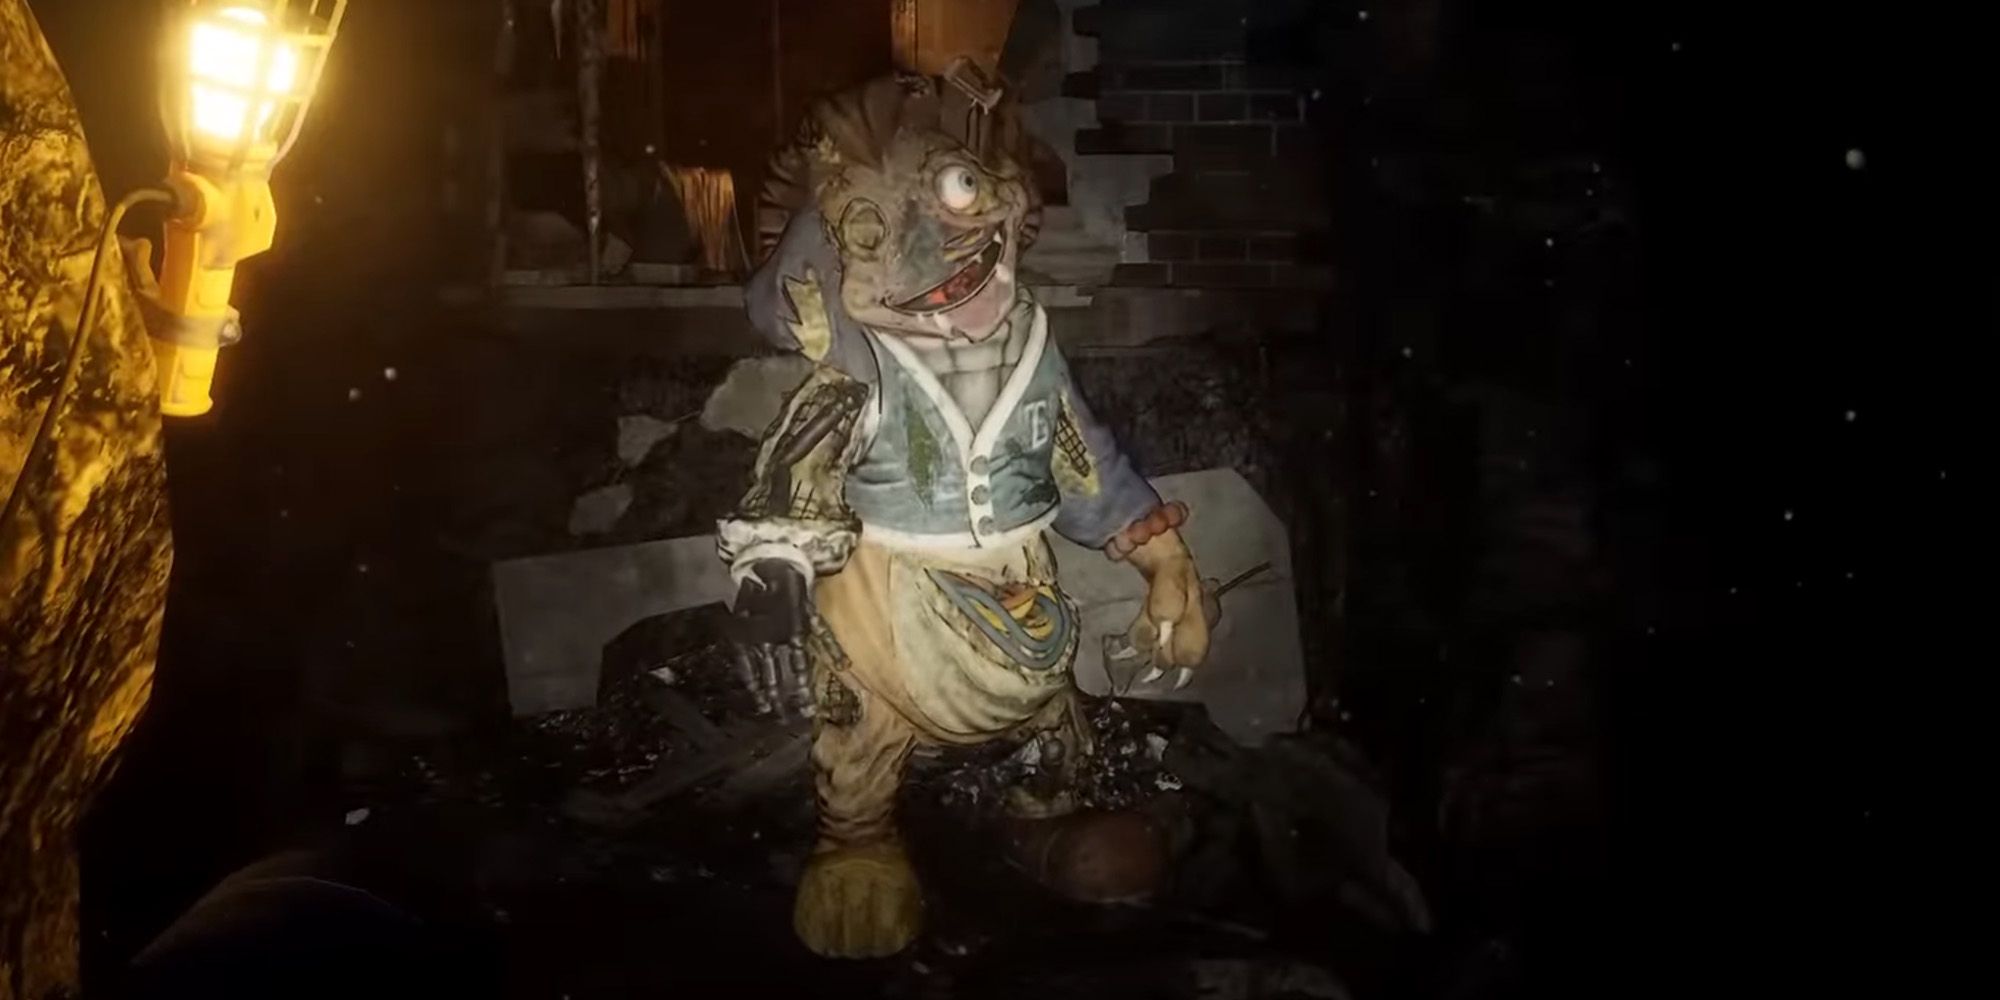 Five Nights At Freddy's Security Breach Ruin DLC - The Mimic In A Hideous, Decaying Mascot Costume